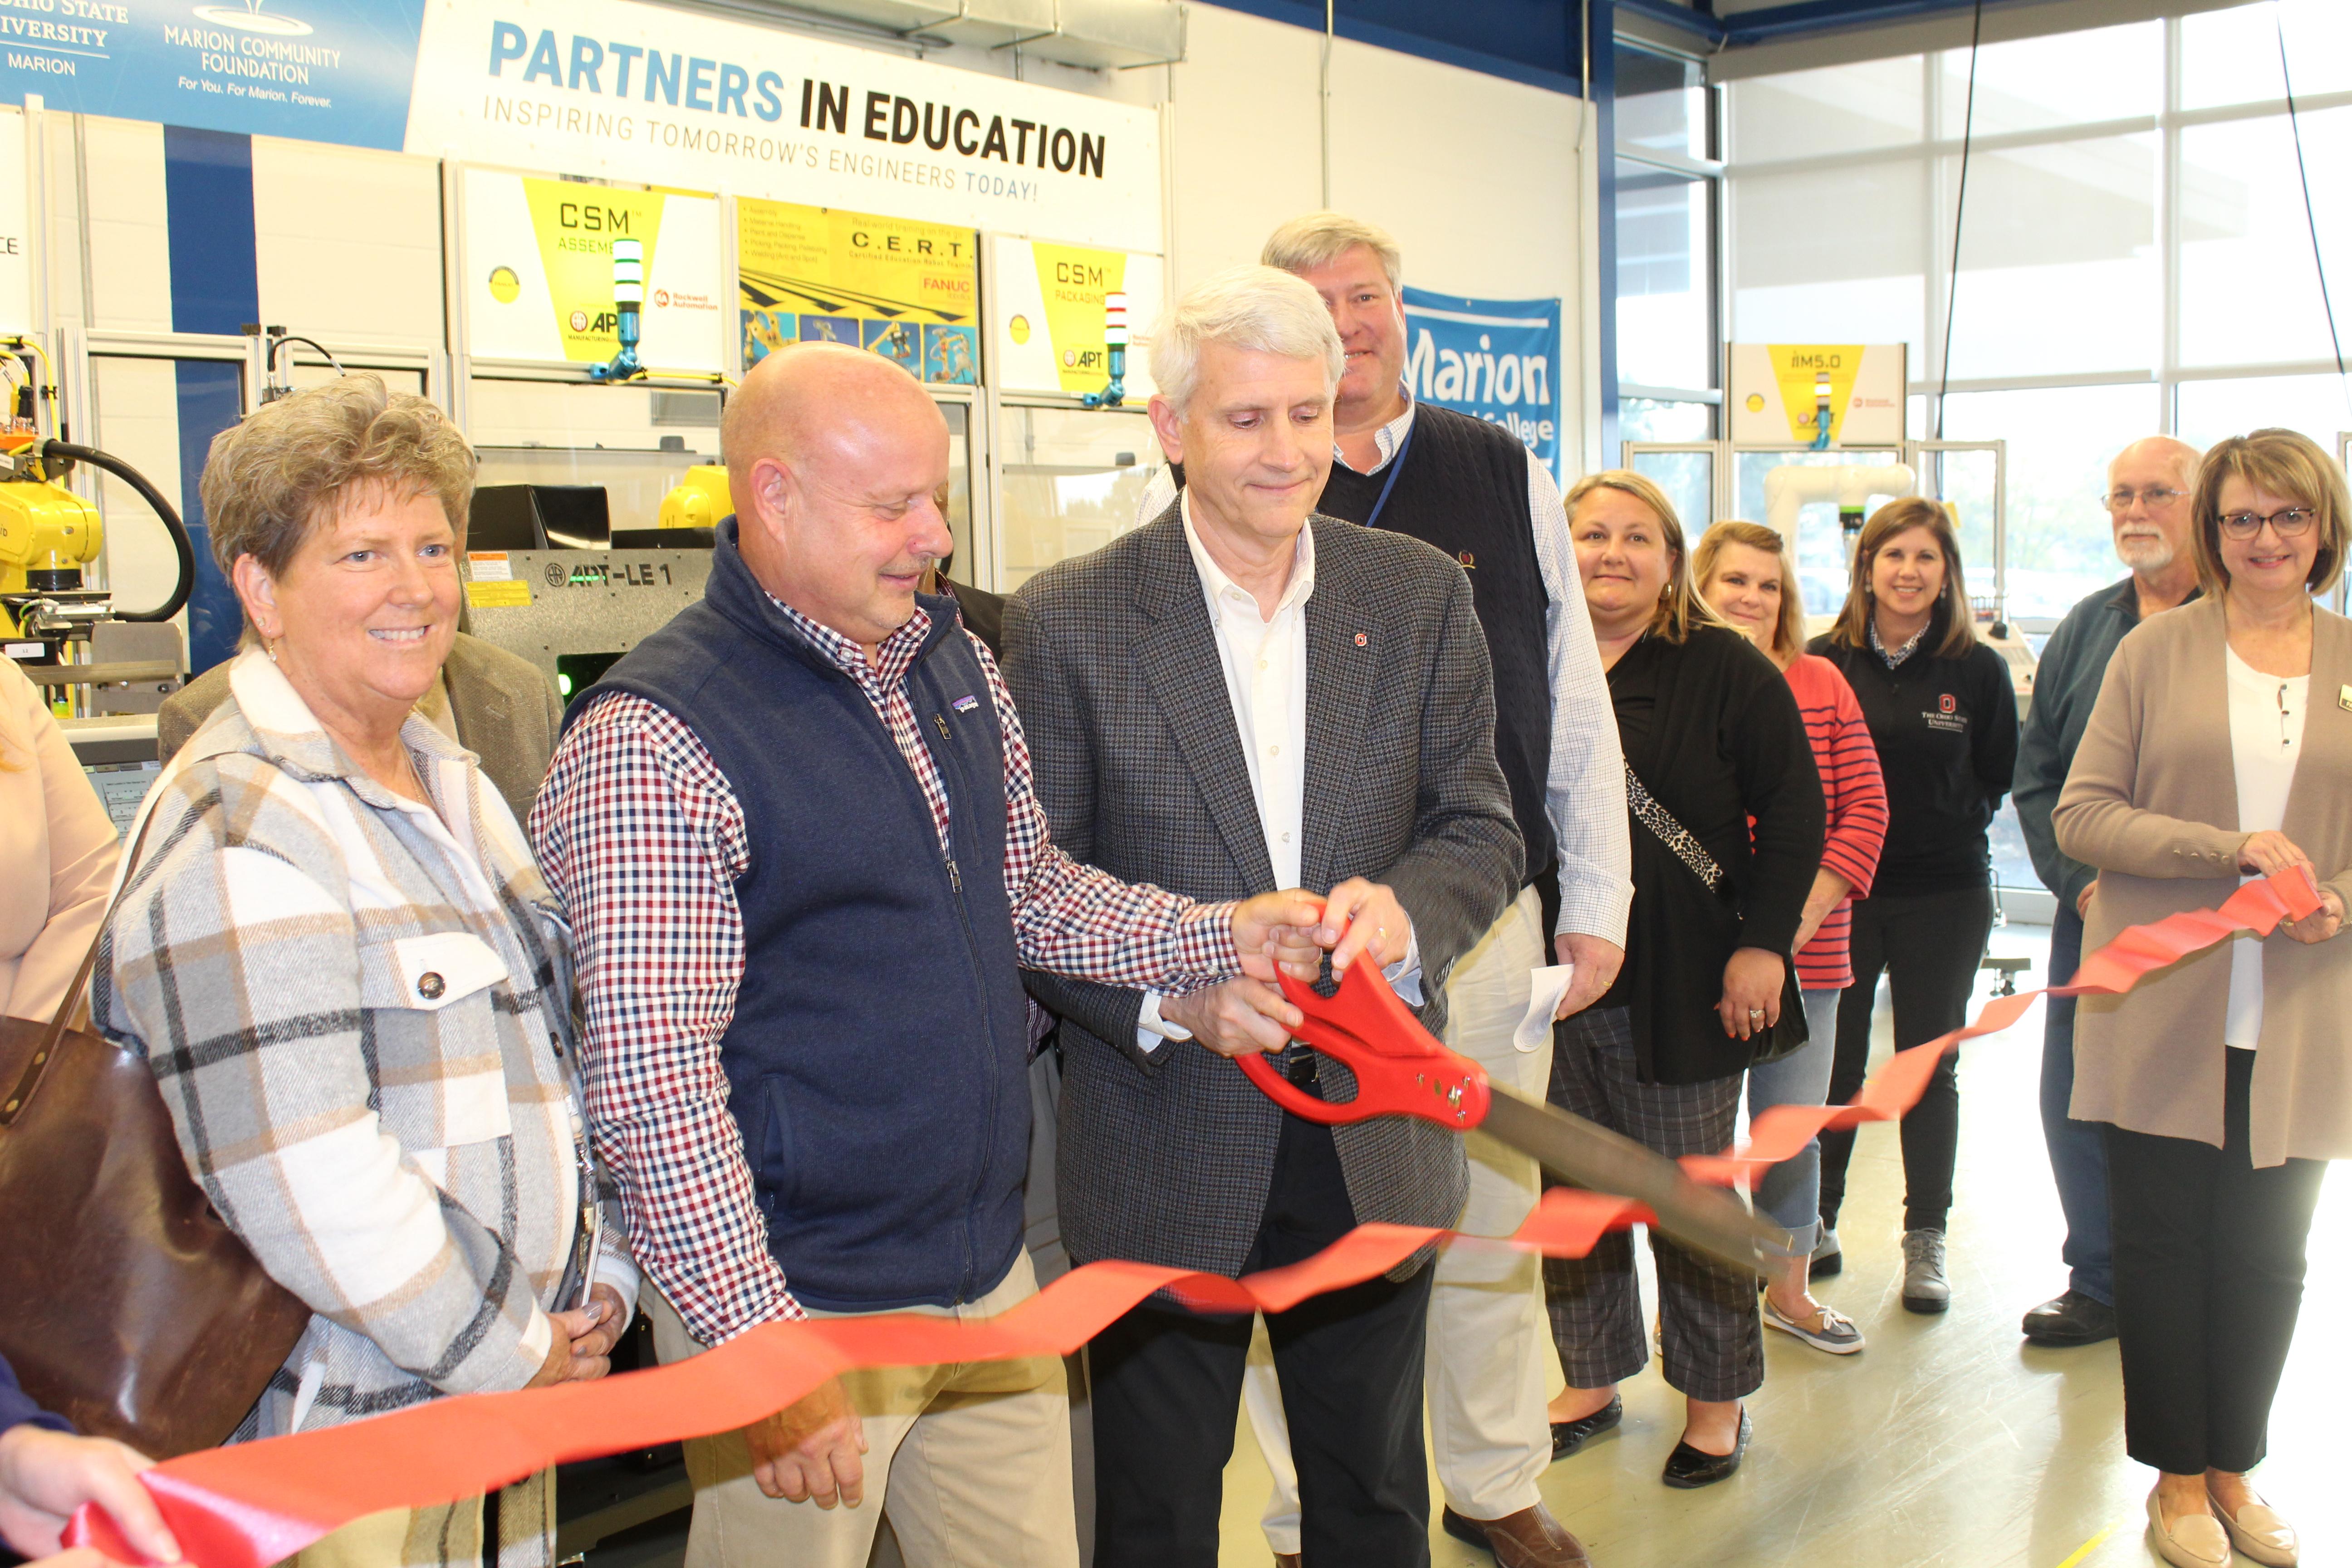 Group of people cutting ribbon at manufacturing education center